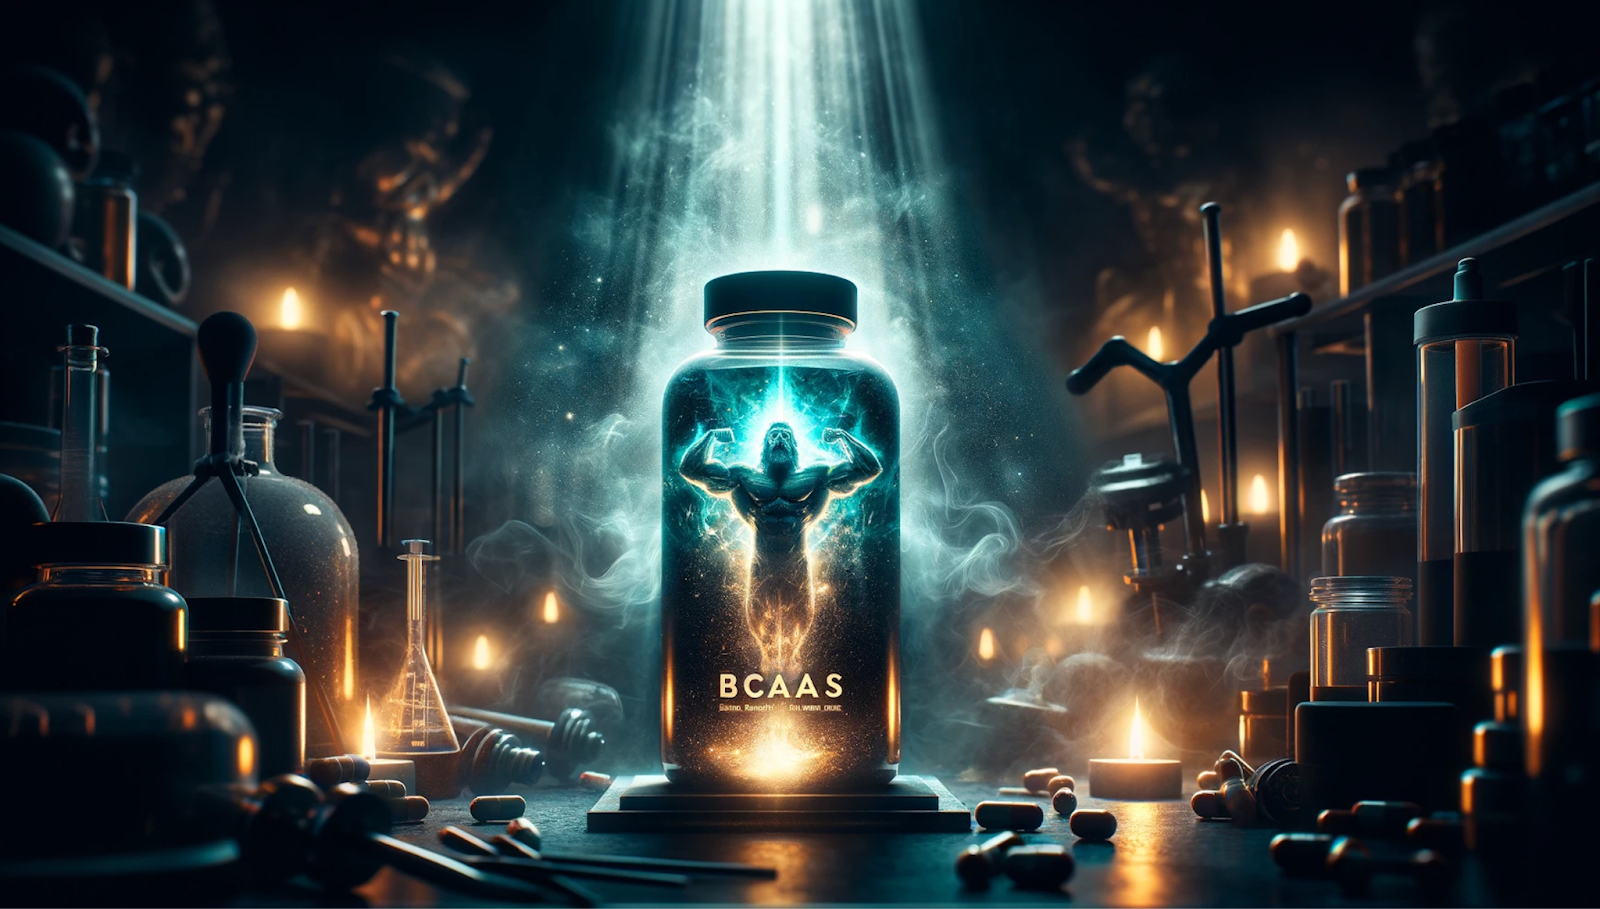 BCAAs, also known as branched-chain amino acids, are essential nutrients that include leucine, isoleucine, and valine. These nutrients are crucial for muscle growth, energy production, and protein synthesis.